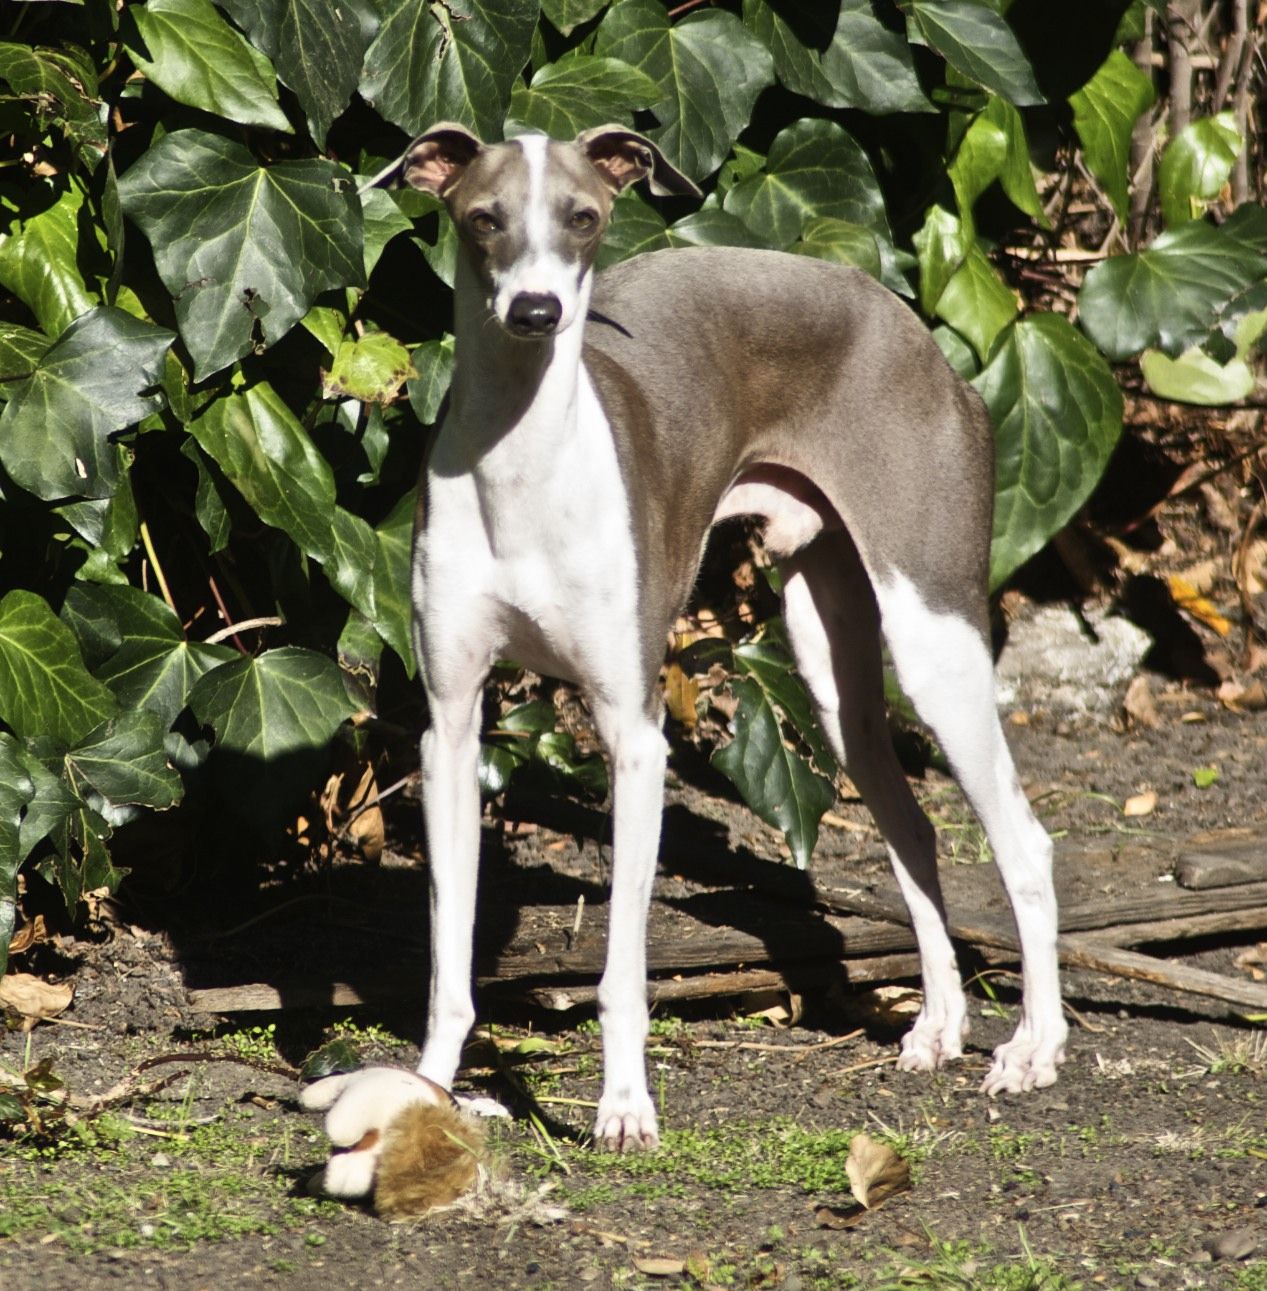 Italian Greyhound Information - Dog Breeds at thepetowners